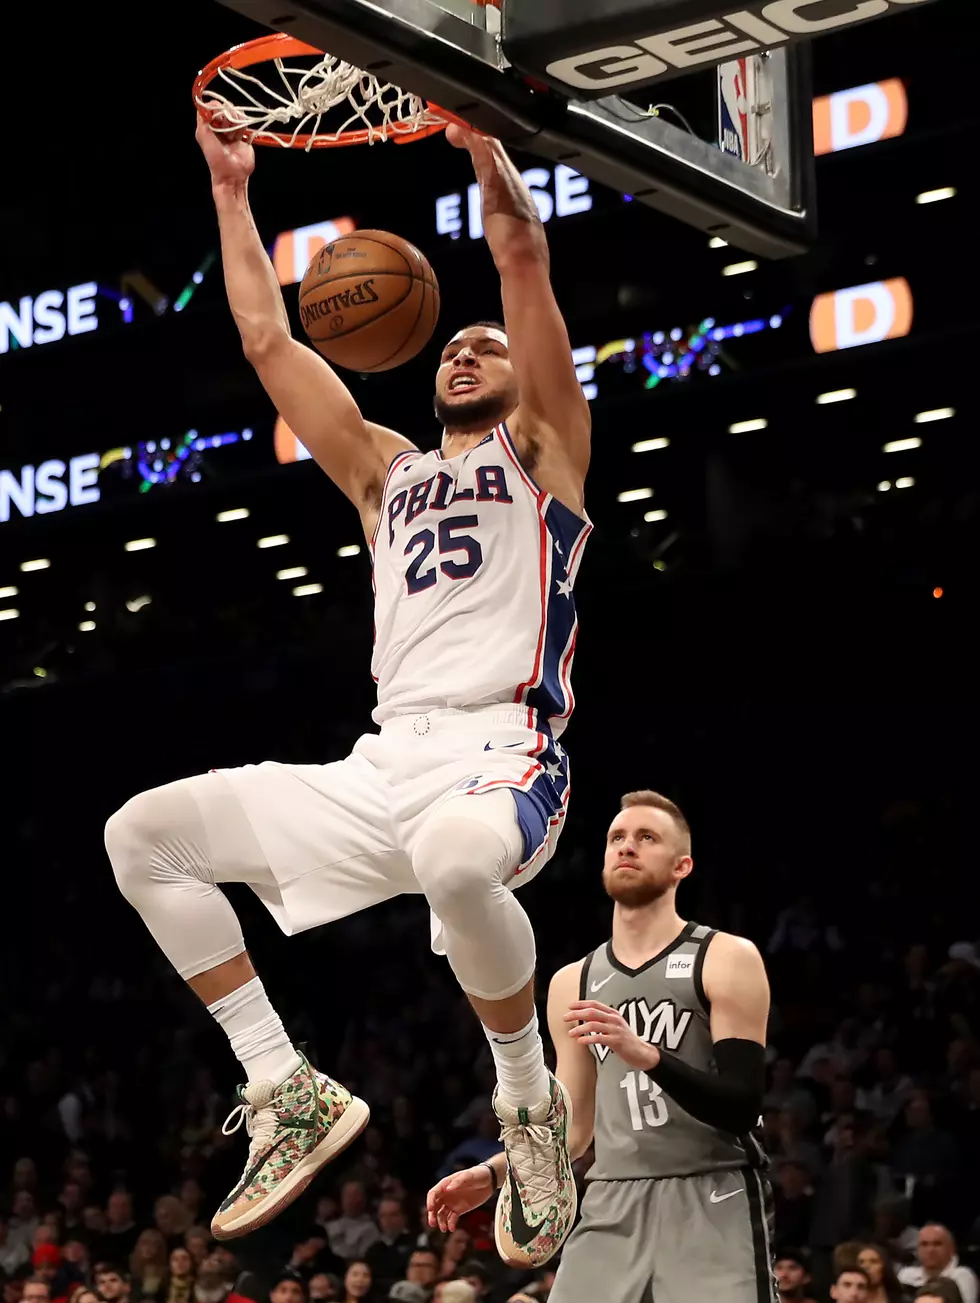 Ben Simmons Completely Dominates the Nets [REACTION]